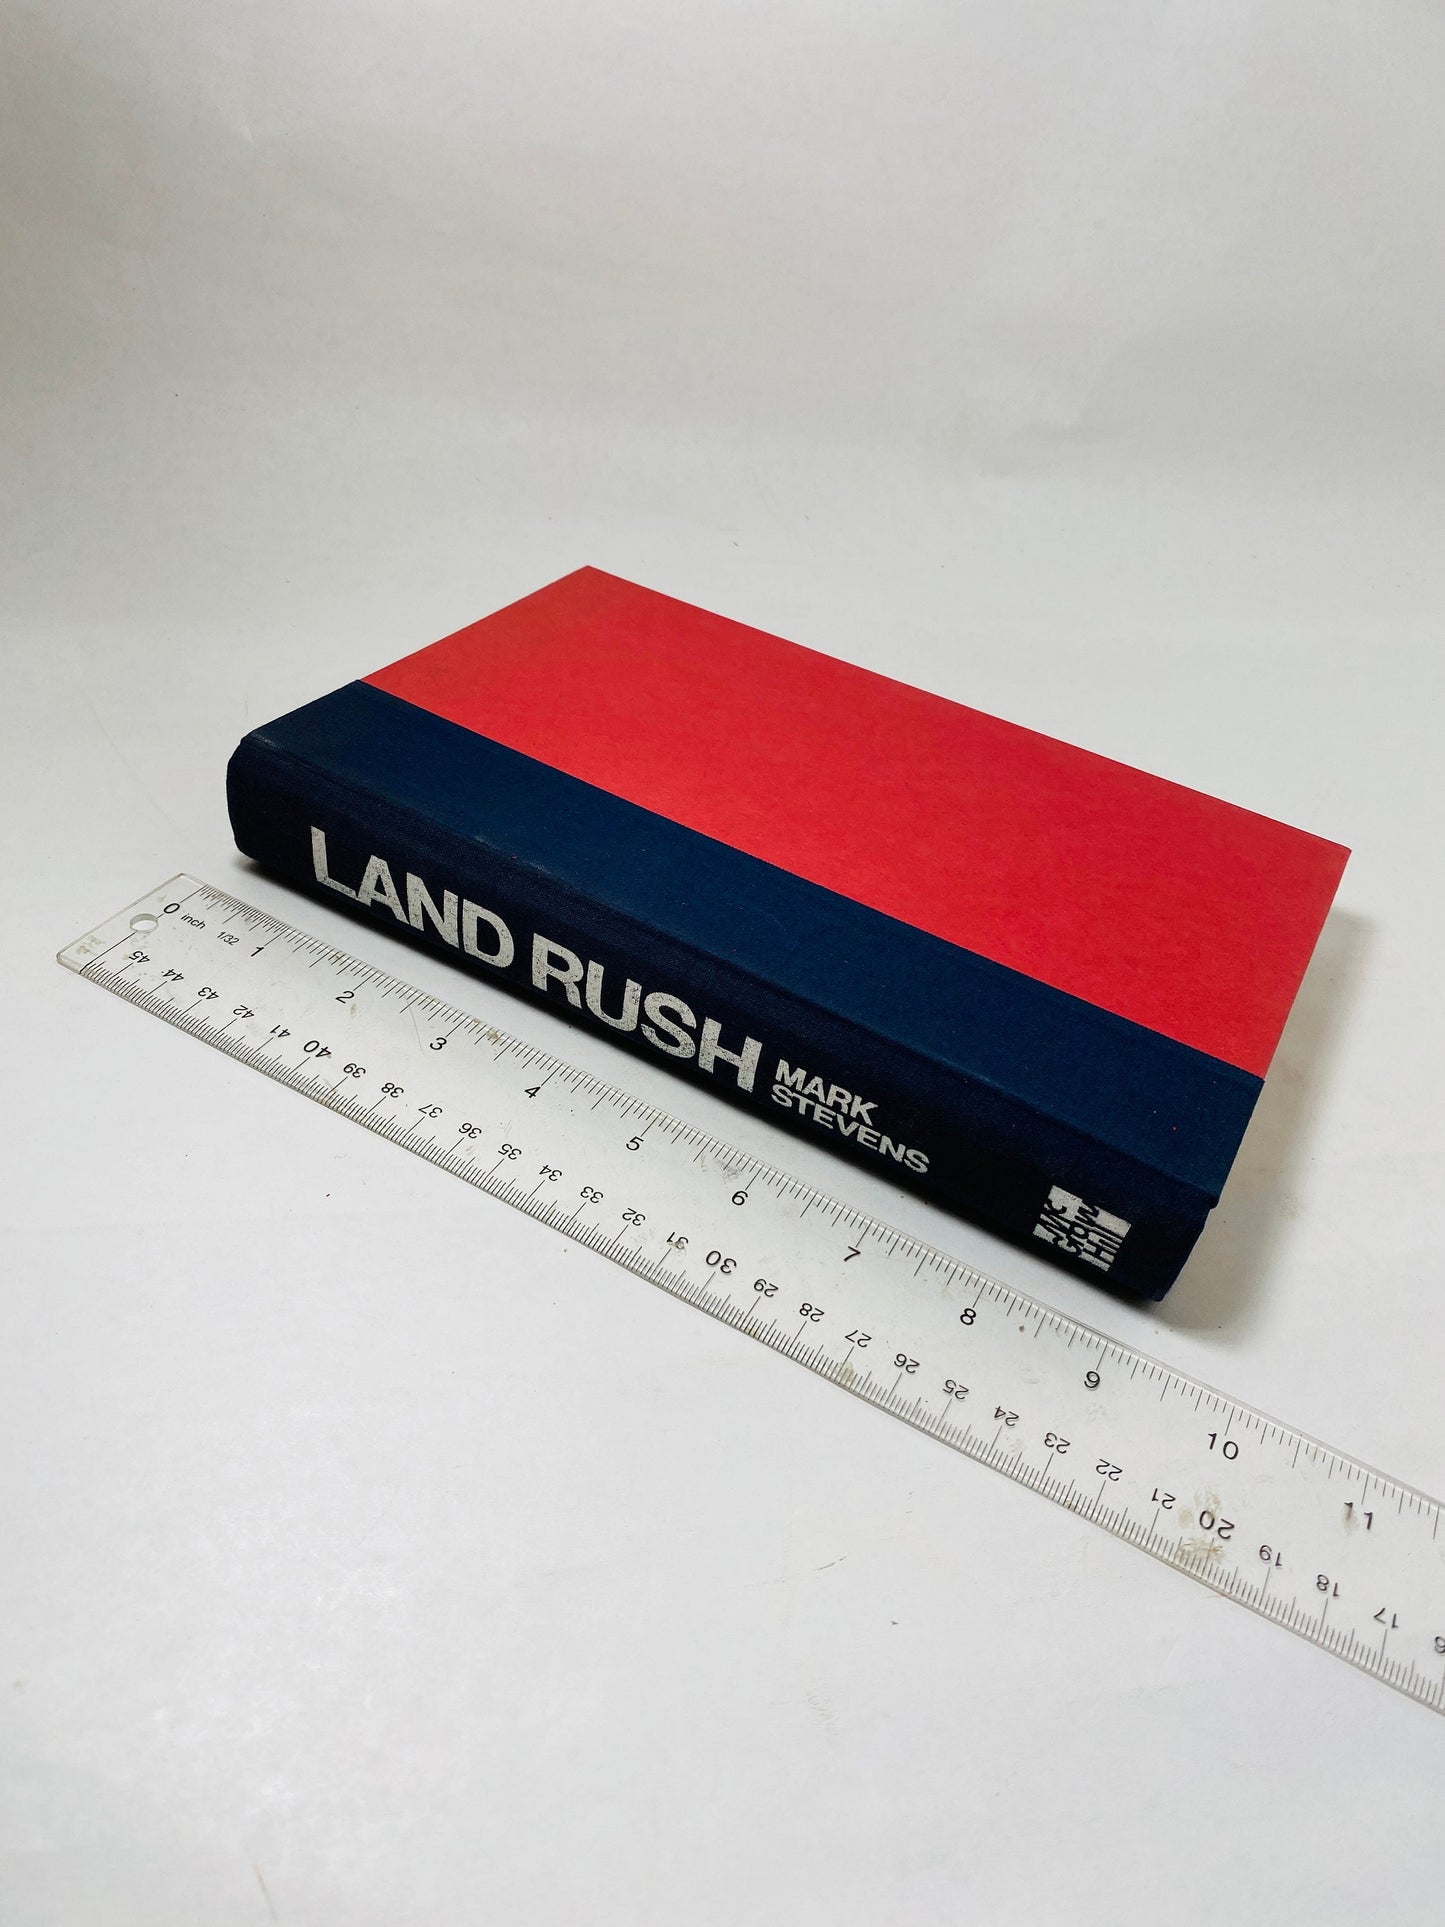 Land Rush vintage book by Stevens The Secret World of Real Estate's Super Brokers and Developers circa 1984